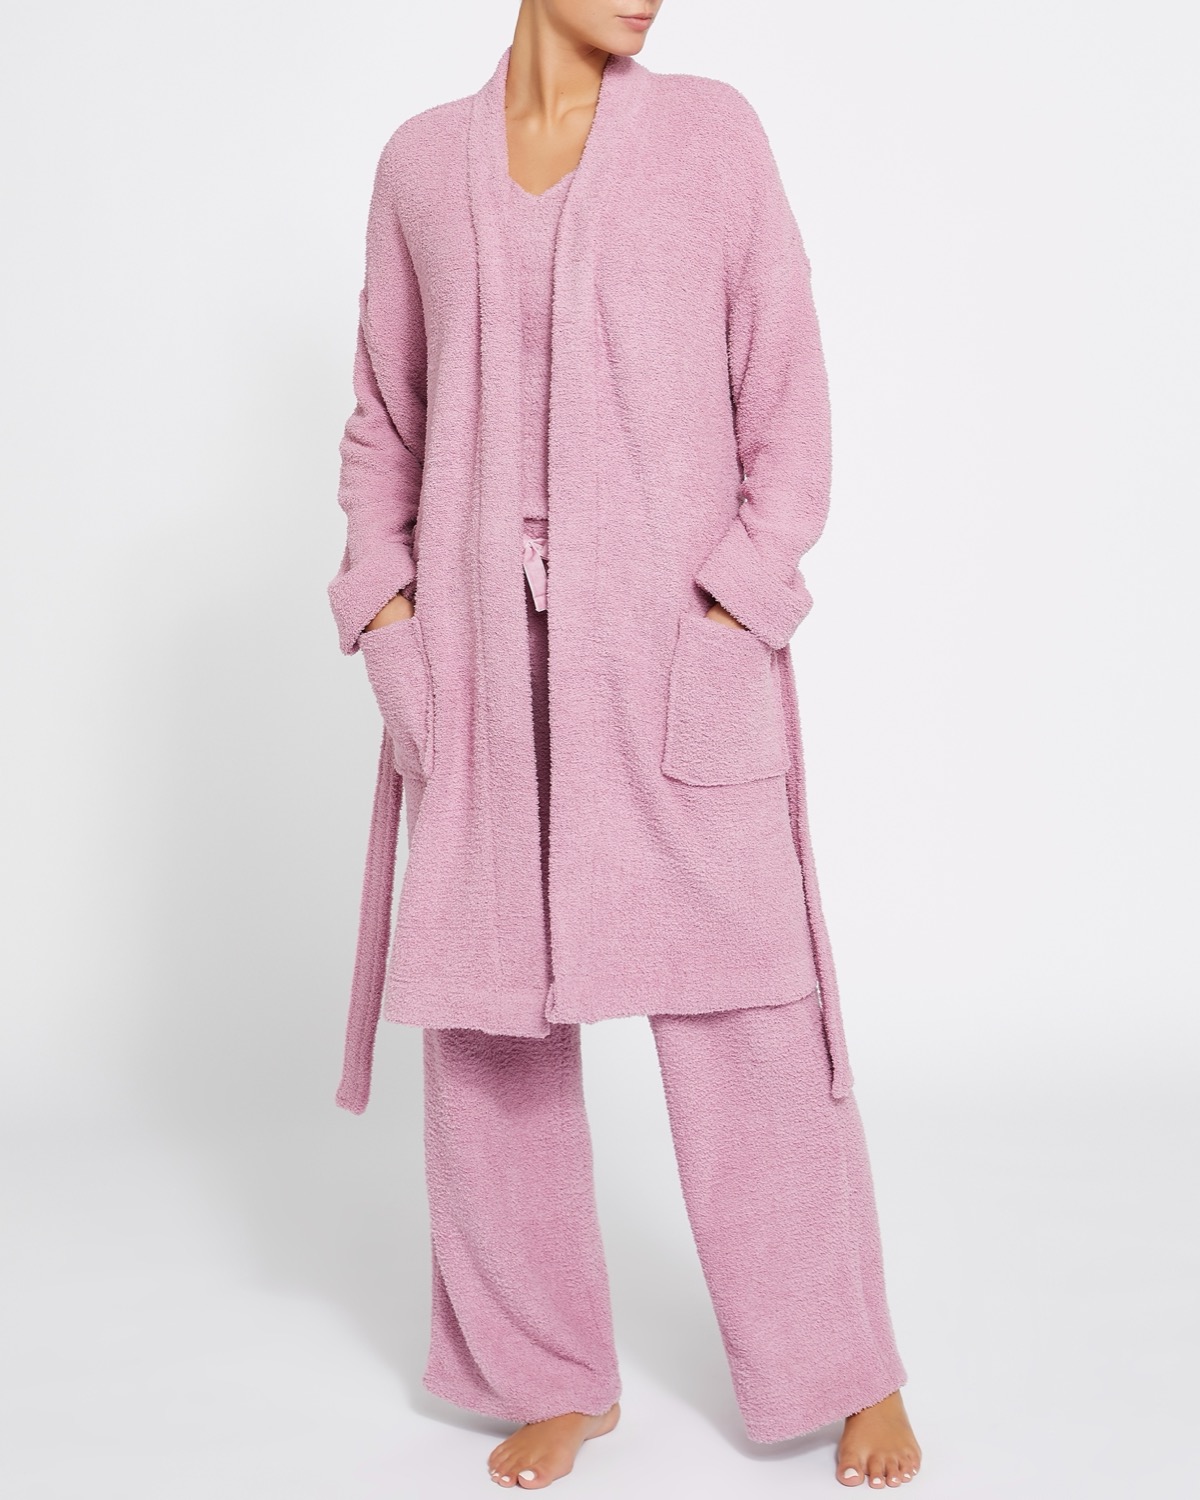 Naked Karate: The Best Bathrobes For Your Daily Coked-Up Practice